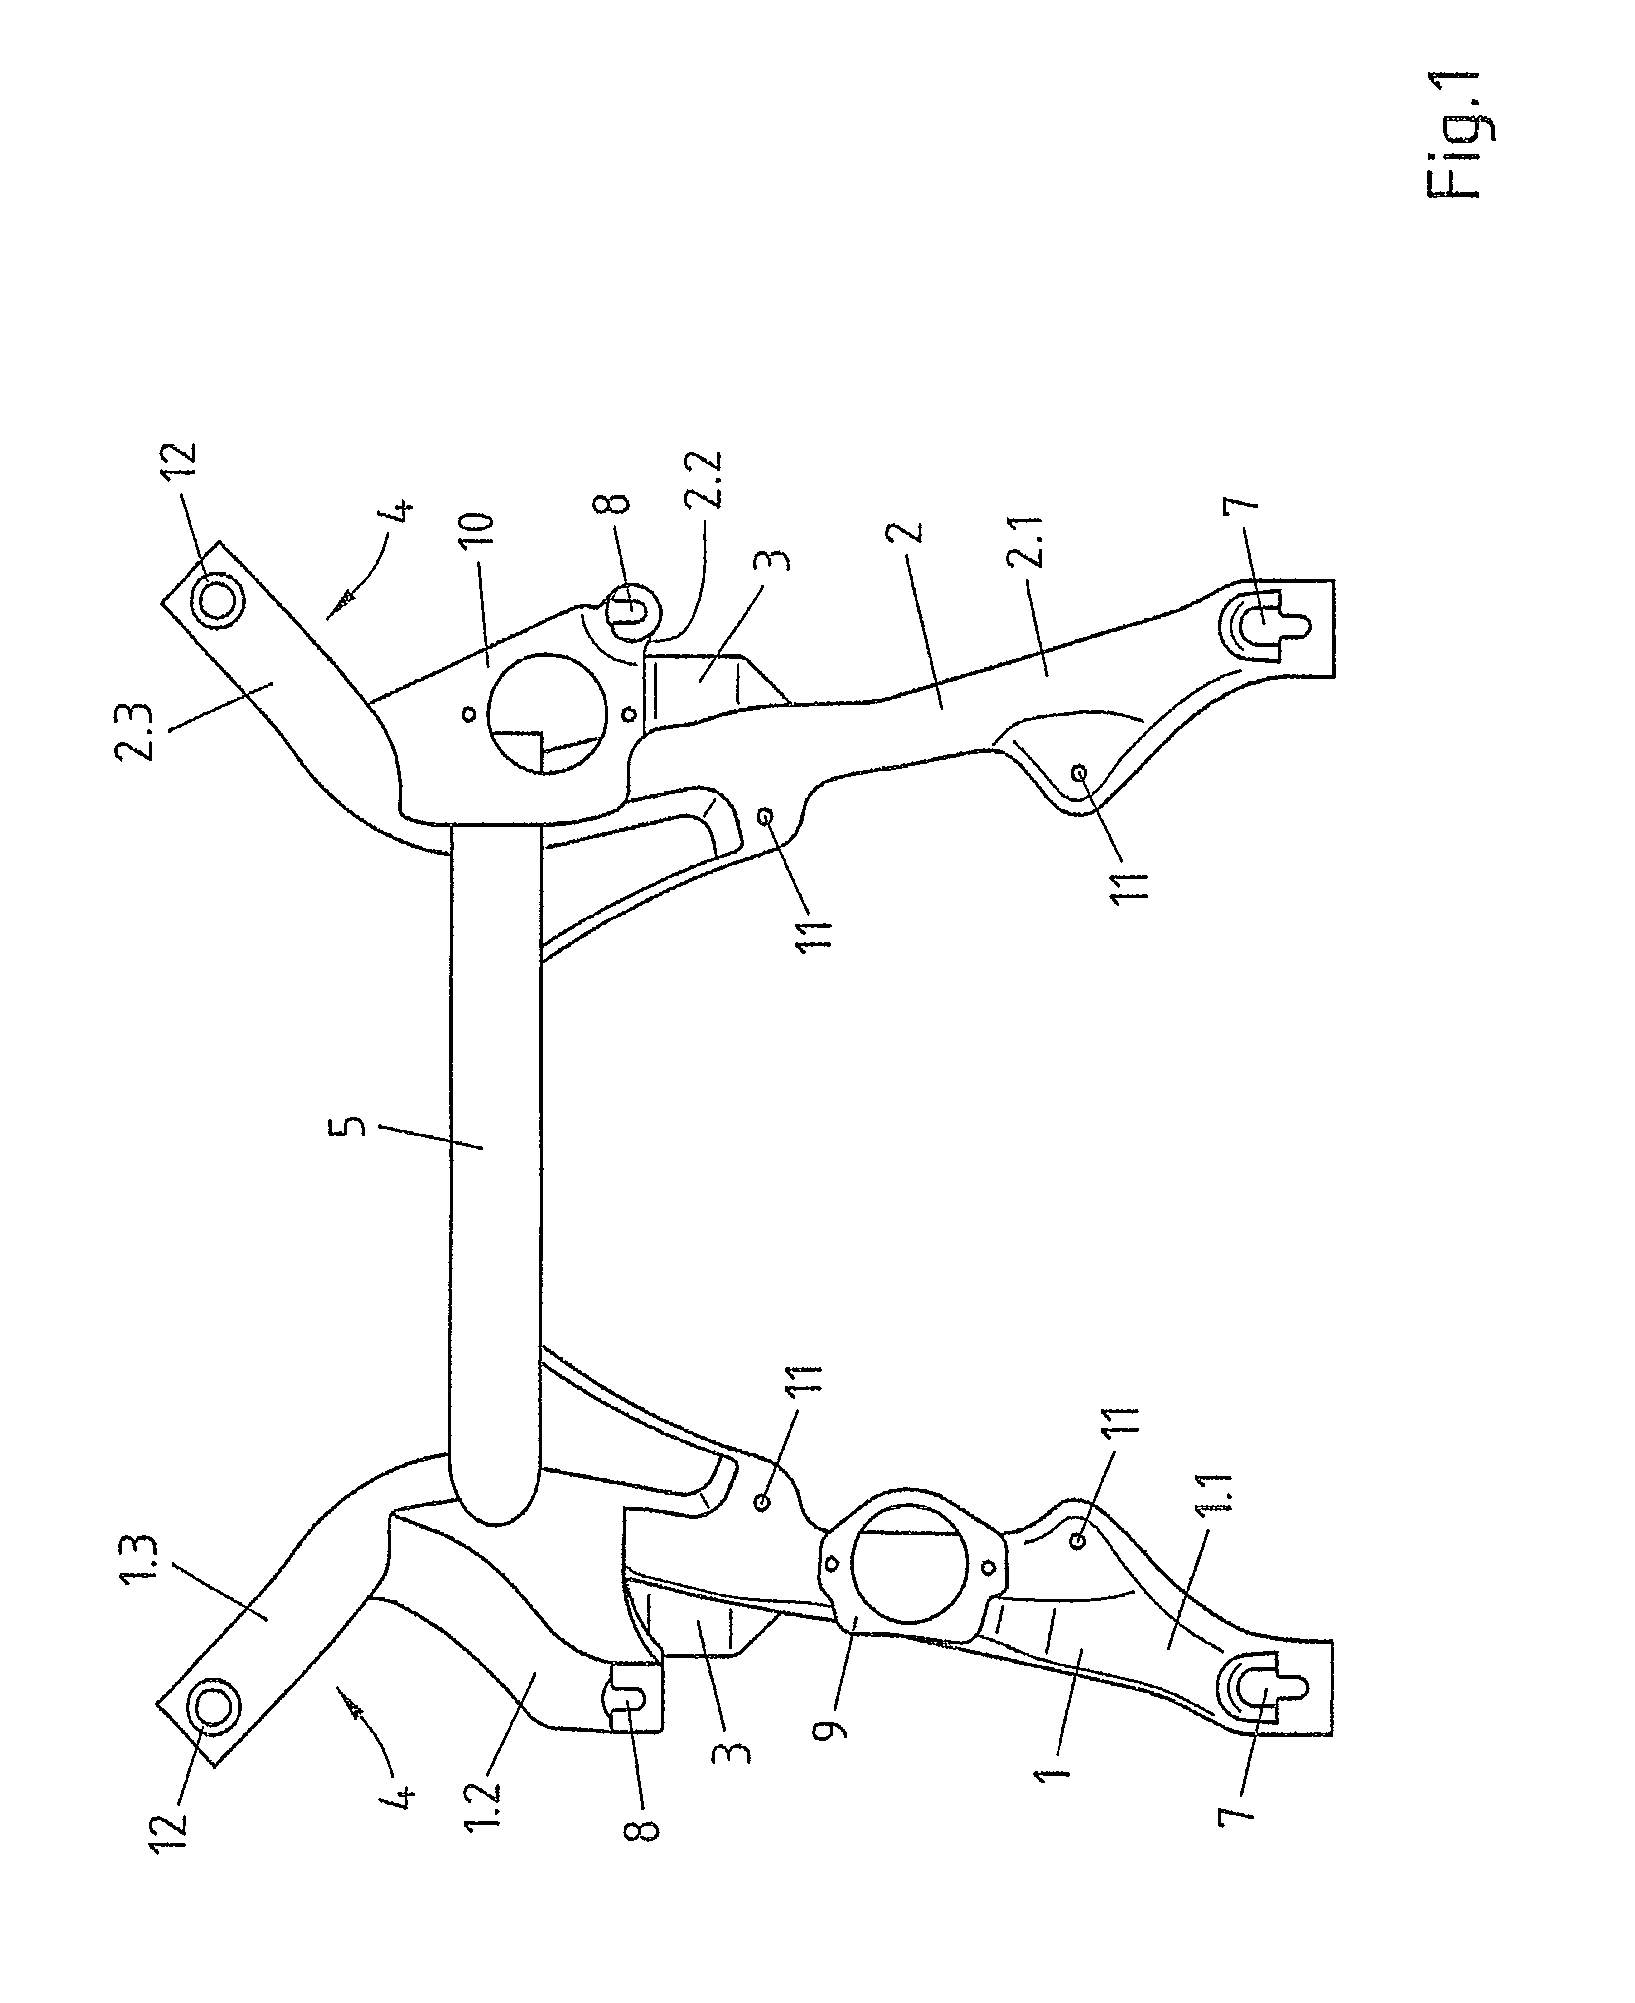 Front axle support having an integrated steering gear housing